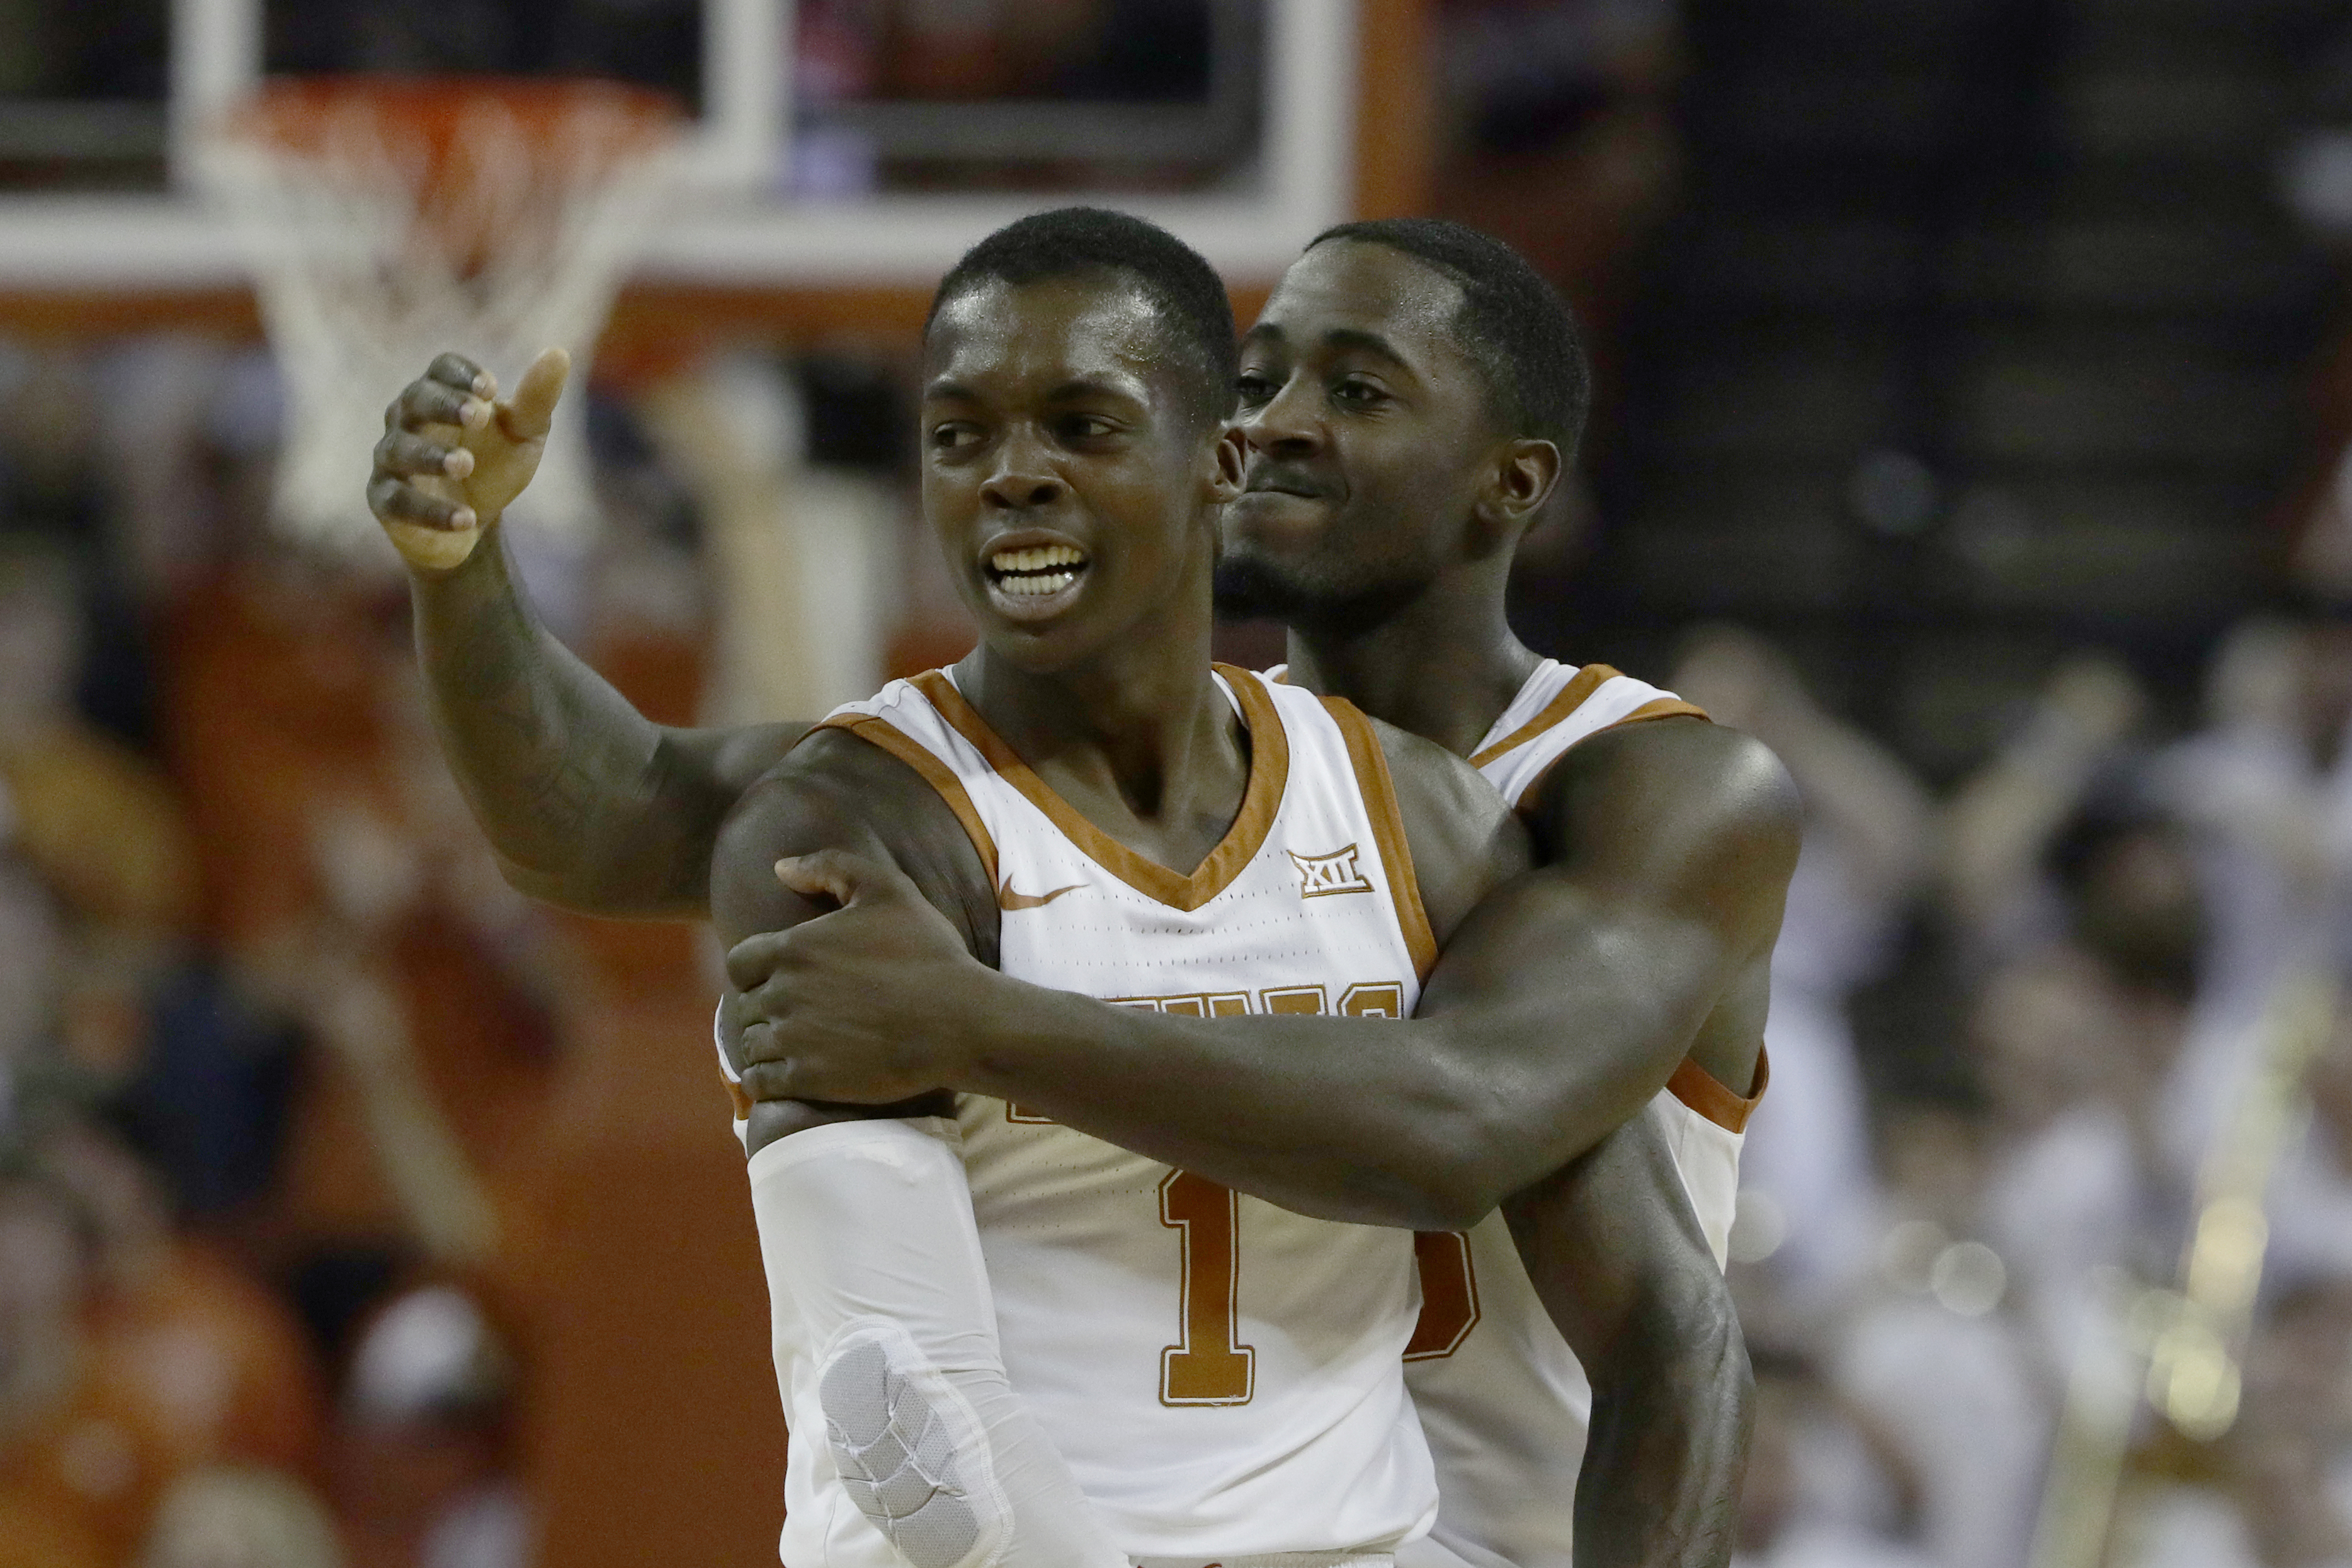 Texas guard Andrew Jones earns 2020 Big 12 Male Sportsperson of the Year